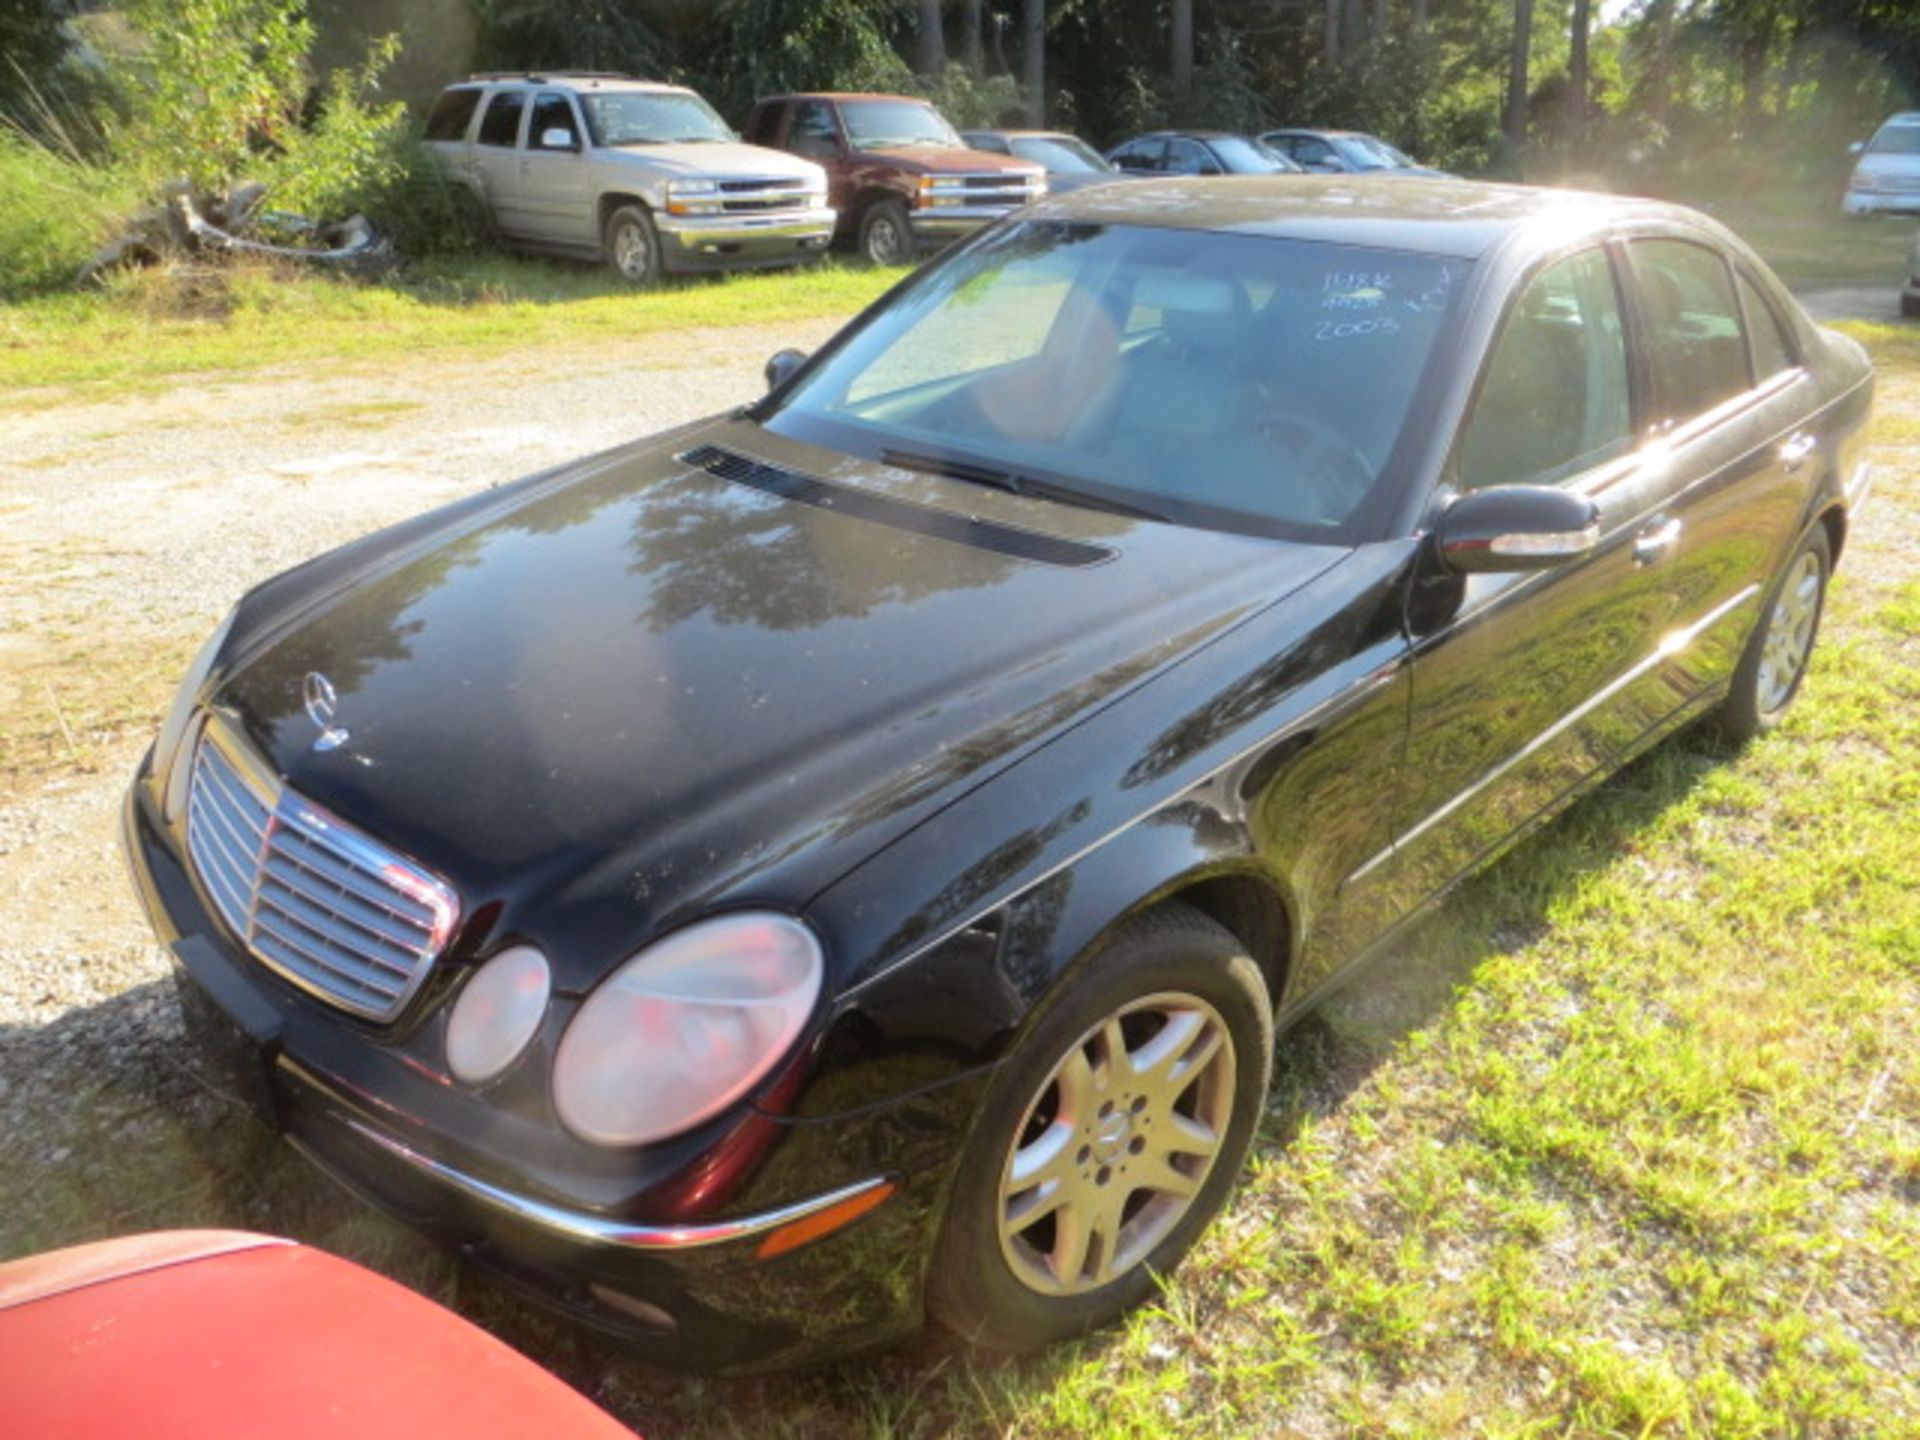 2003 MERCEDES E320 148000 MILES,VIN WDBUF65J43A159928, SOLD WITH GOOD TRANSFERABLE TITLE, ALL VEHICL